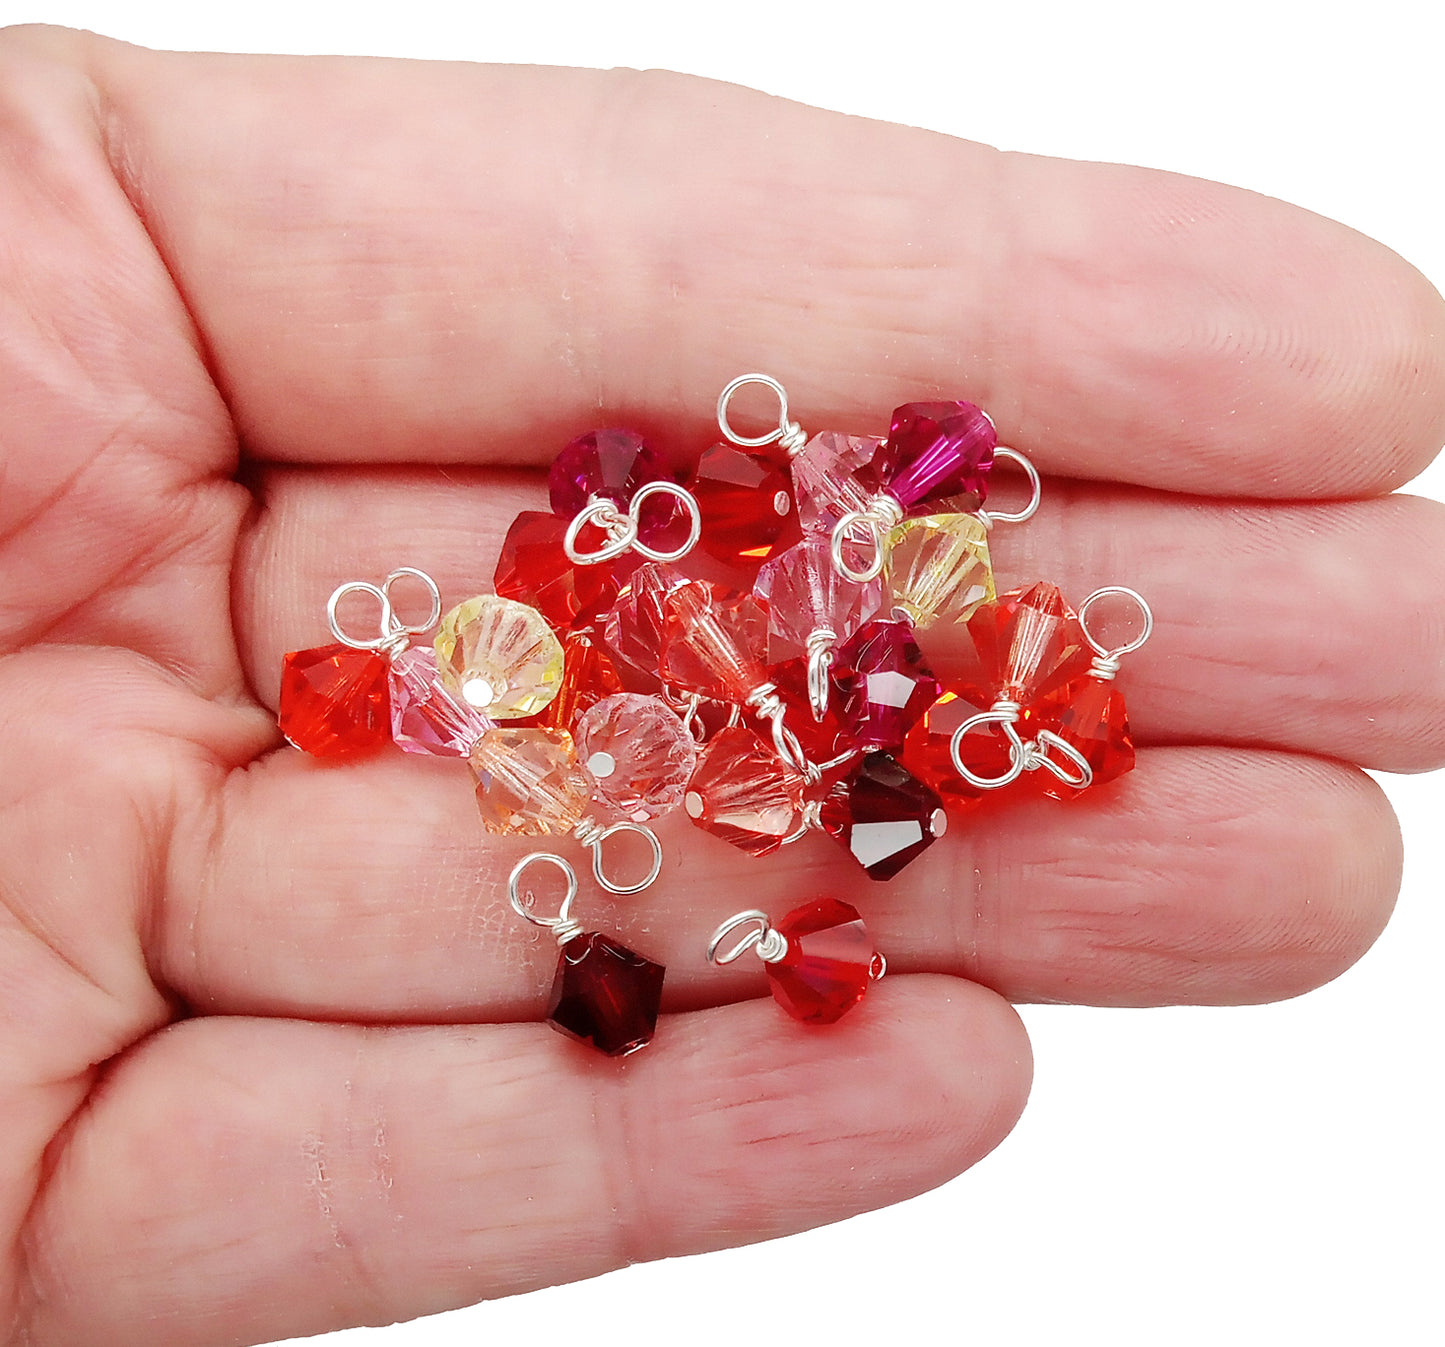 25 Bicone Dangles, Mix of Bead Charms in Red, Orange, Yellow & Pink, 6mm Bicone Beads